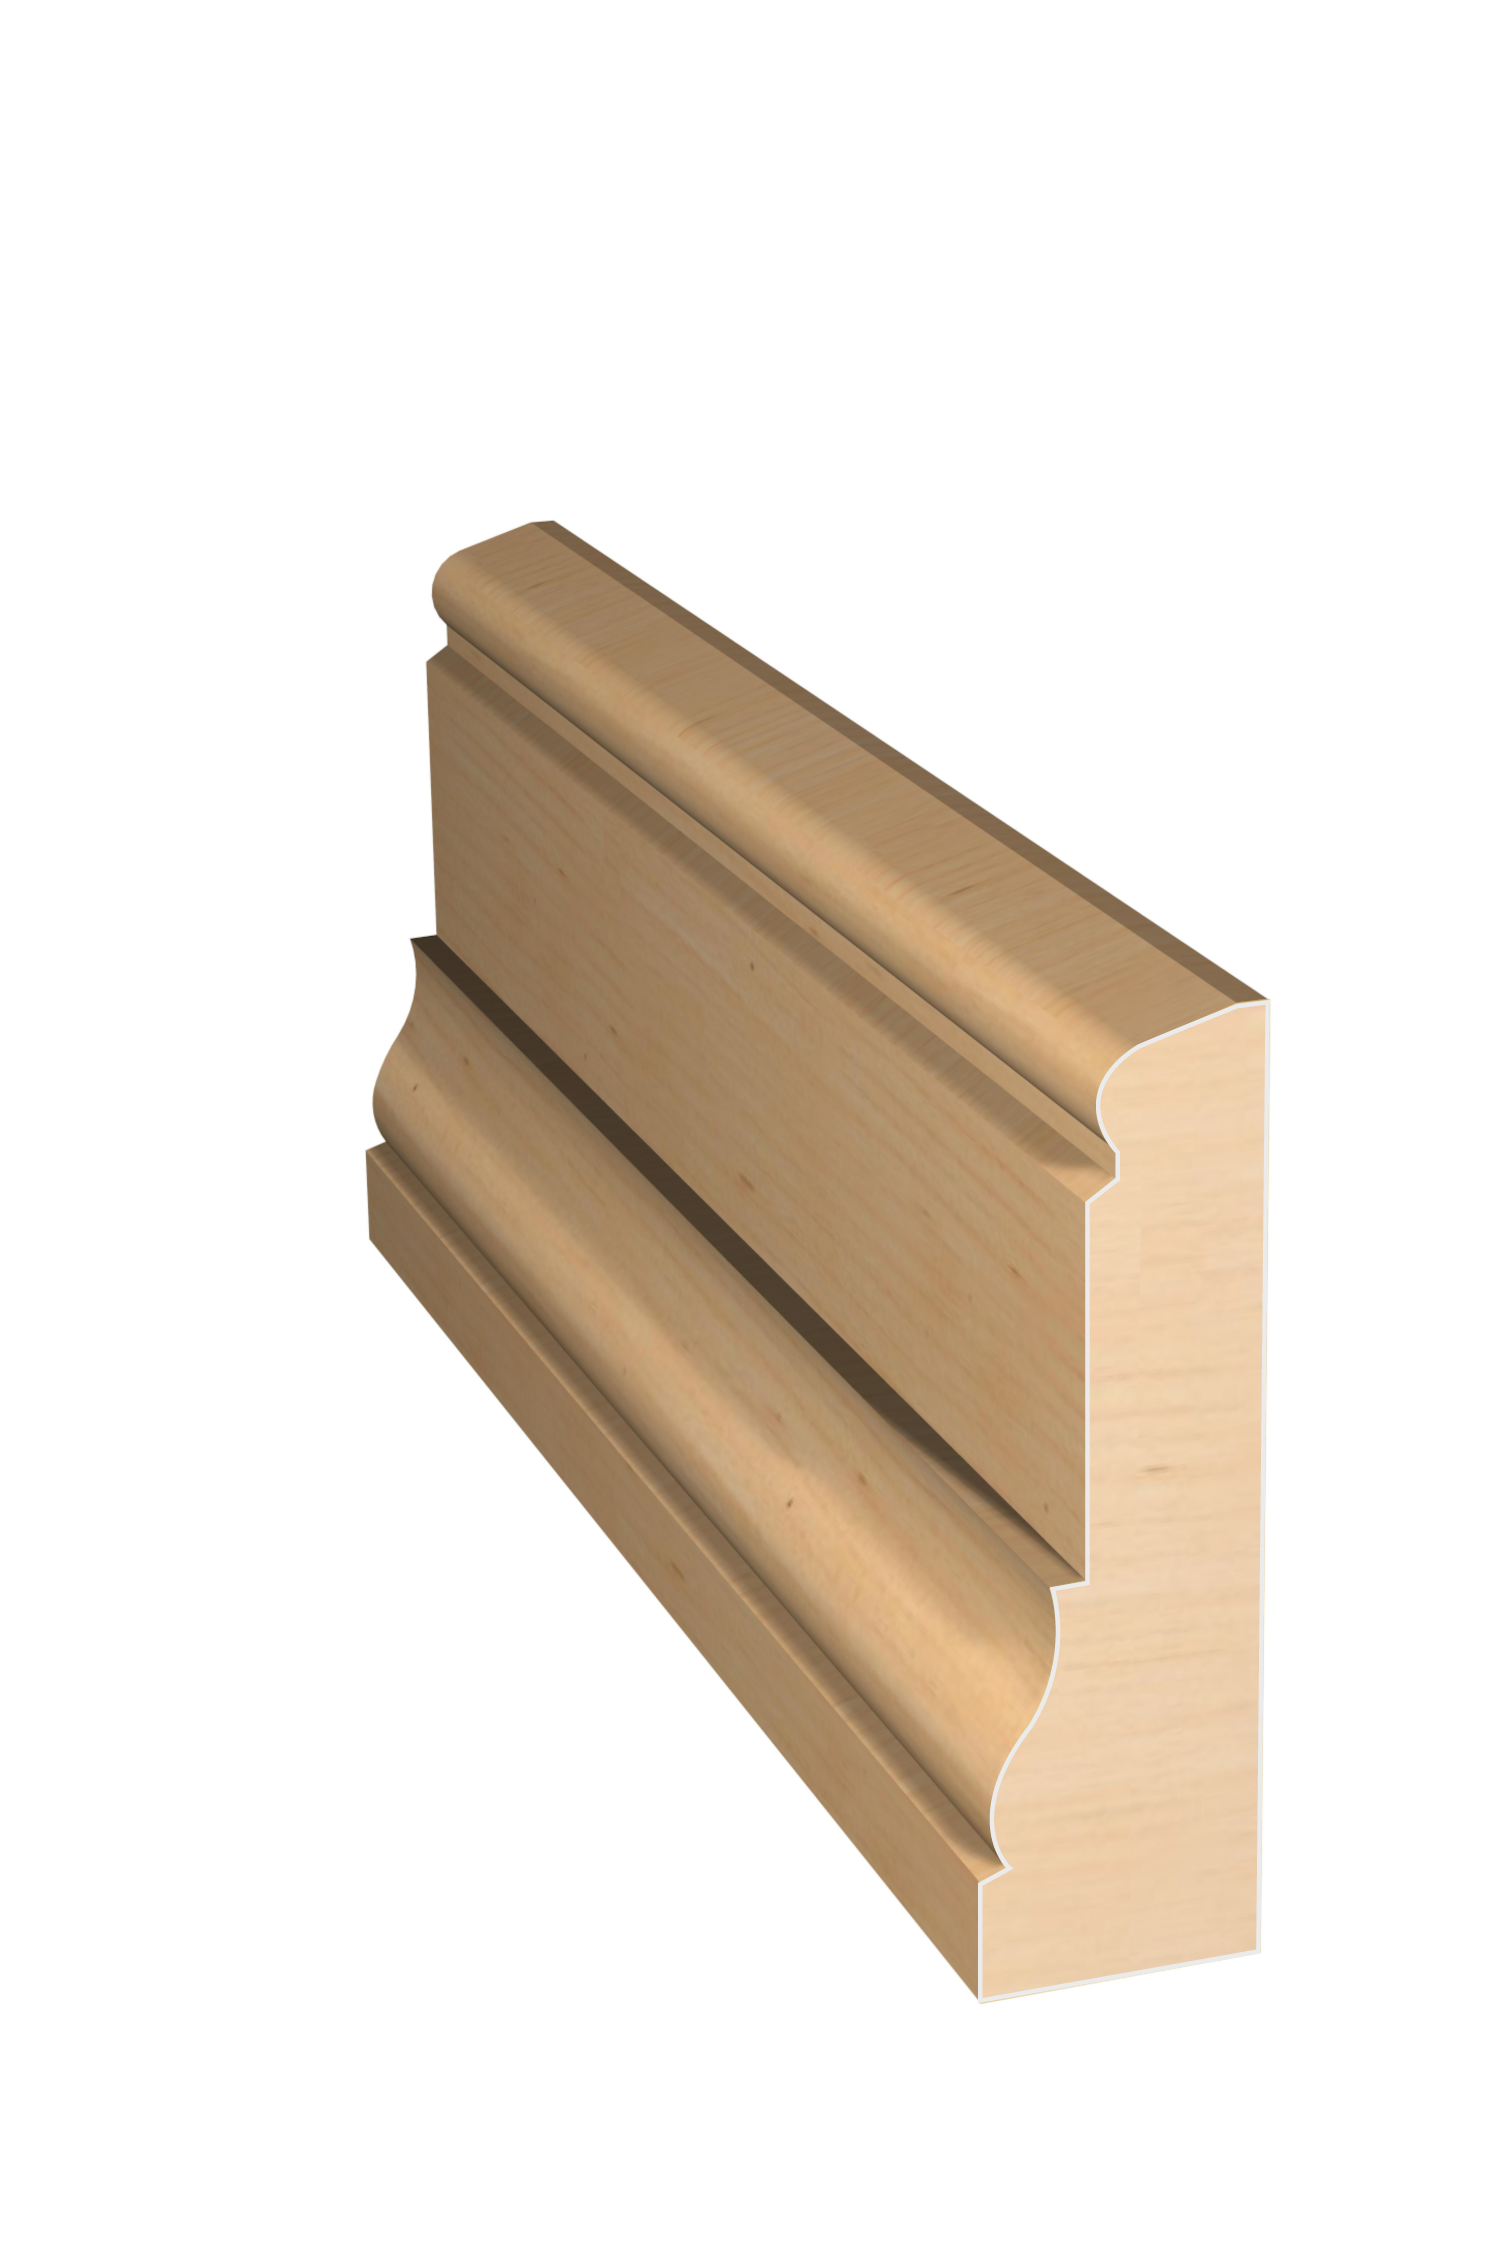 Three dimensional rendering of custom casing wood molding CAPL21220 made by Public Lumber Company in Detroit.